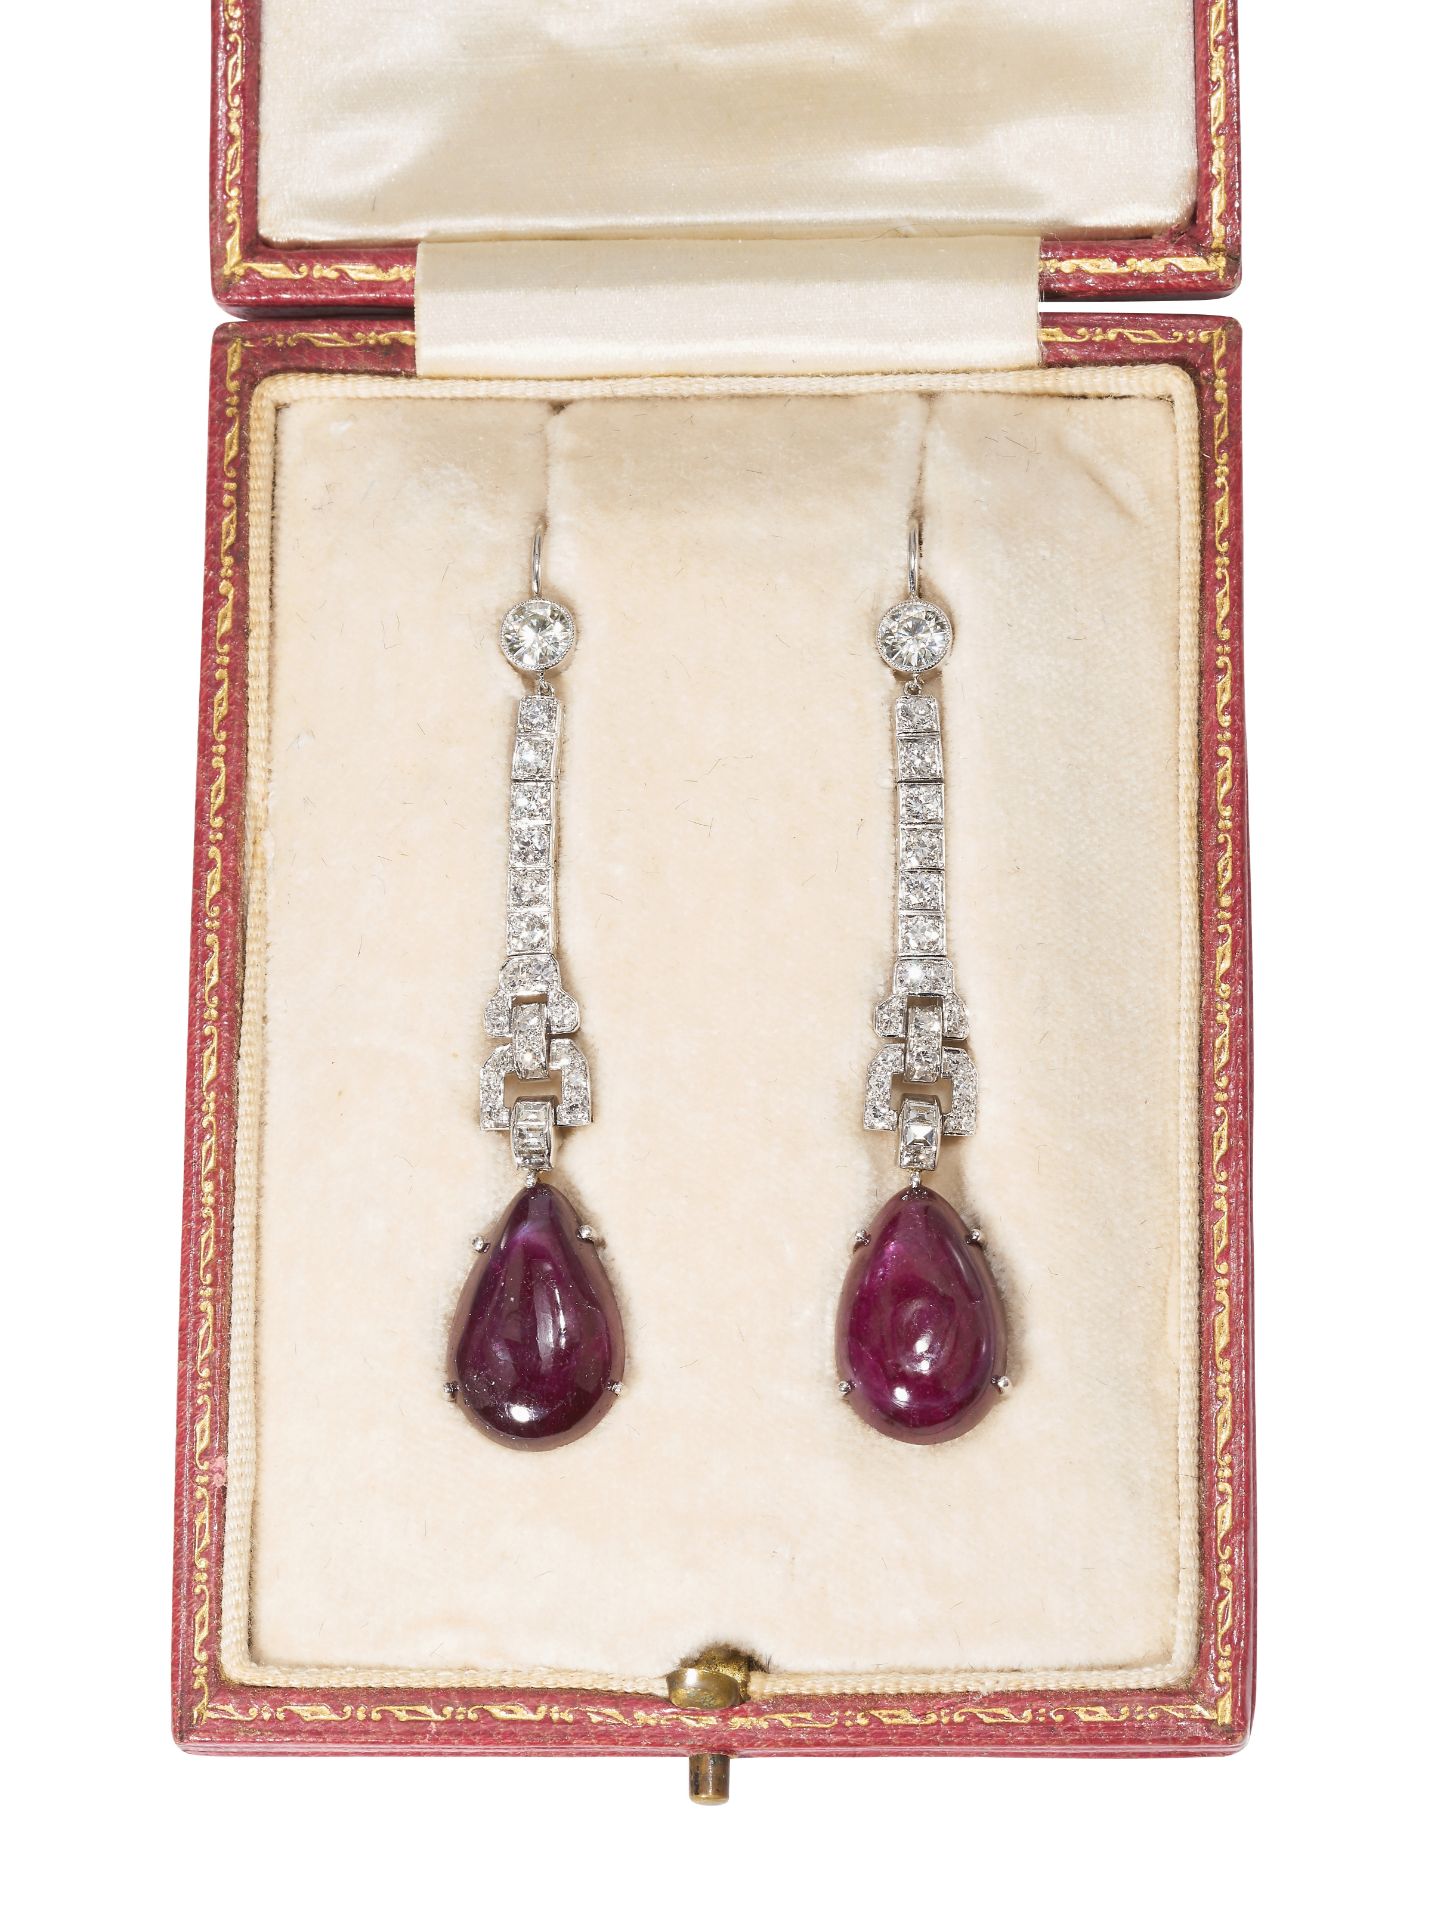 FINE PAIR OF ART-DECO RUBY AND DIAMOND DROP EARRINGS - Image 2 of 2